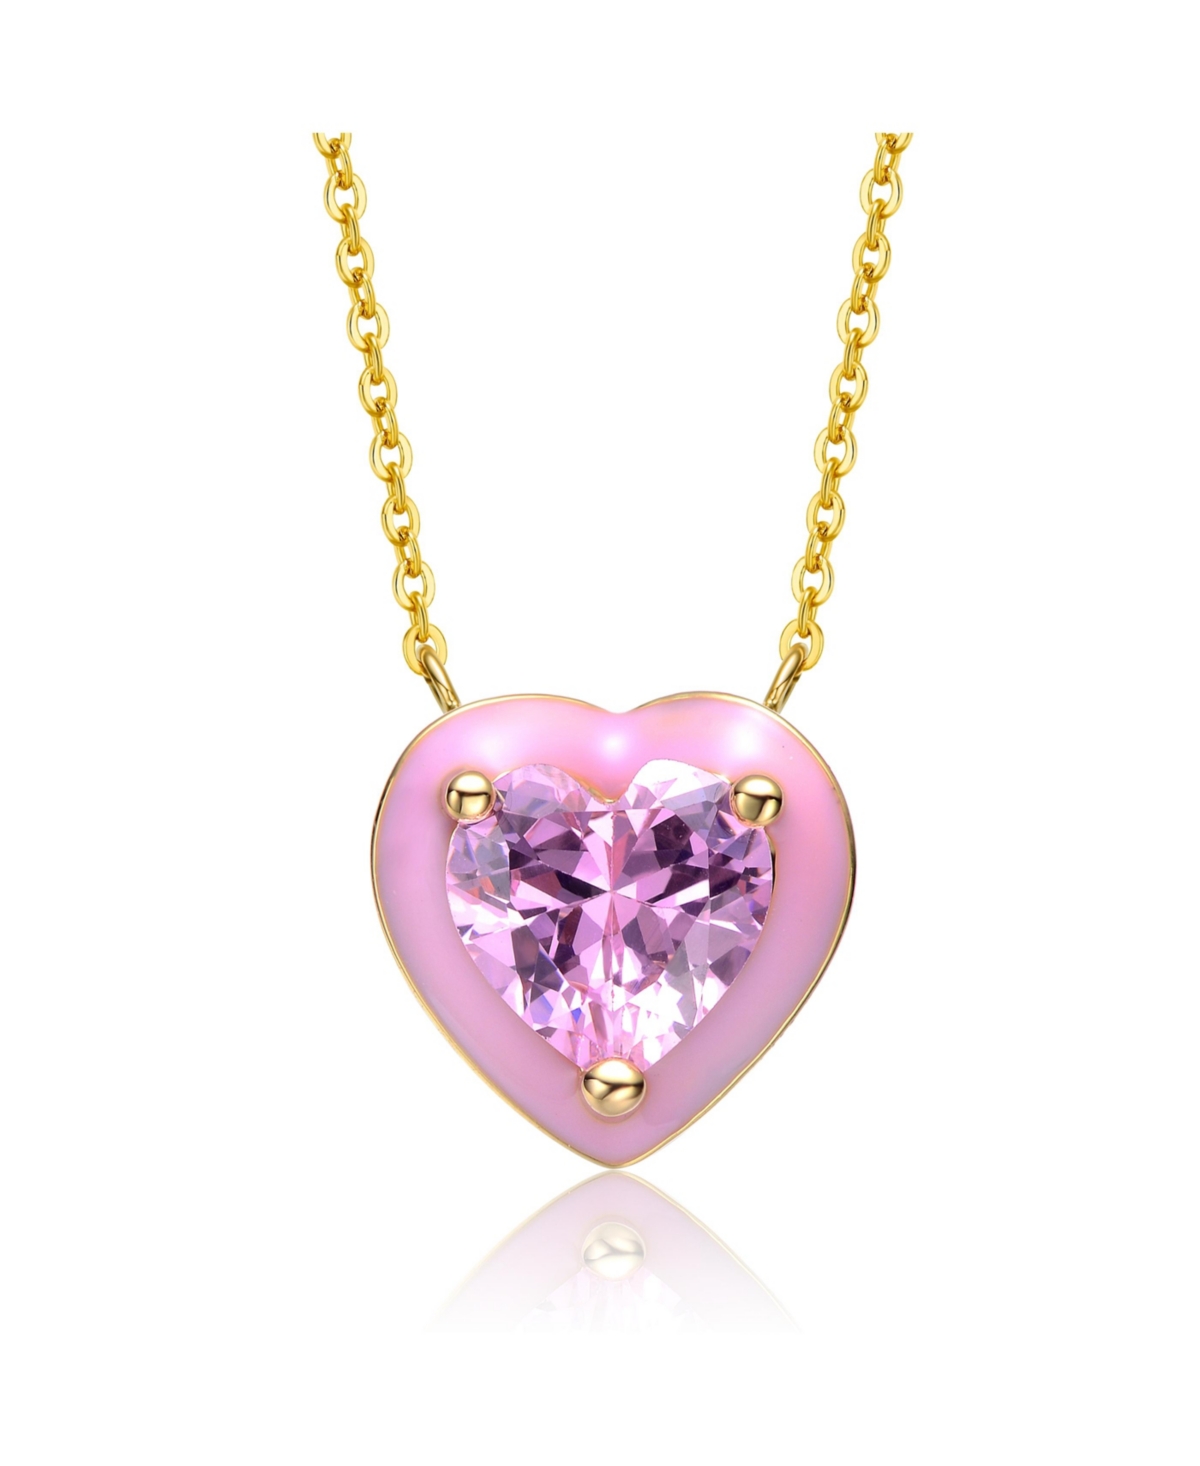 Teens/Young Adults 14k Gold Plated with Pink Morganite Cubic Zirconia Pink Enamel Heart Dainty Pendant - Gold